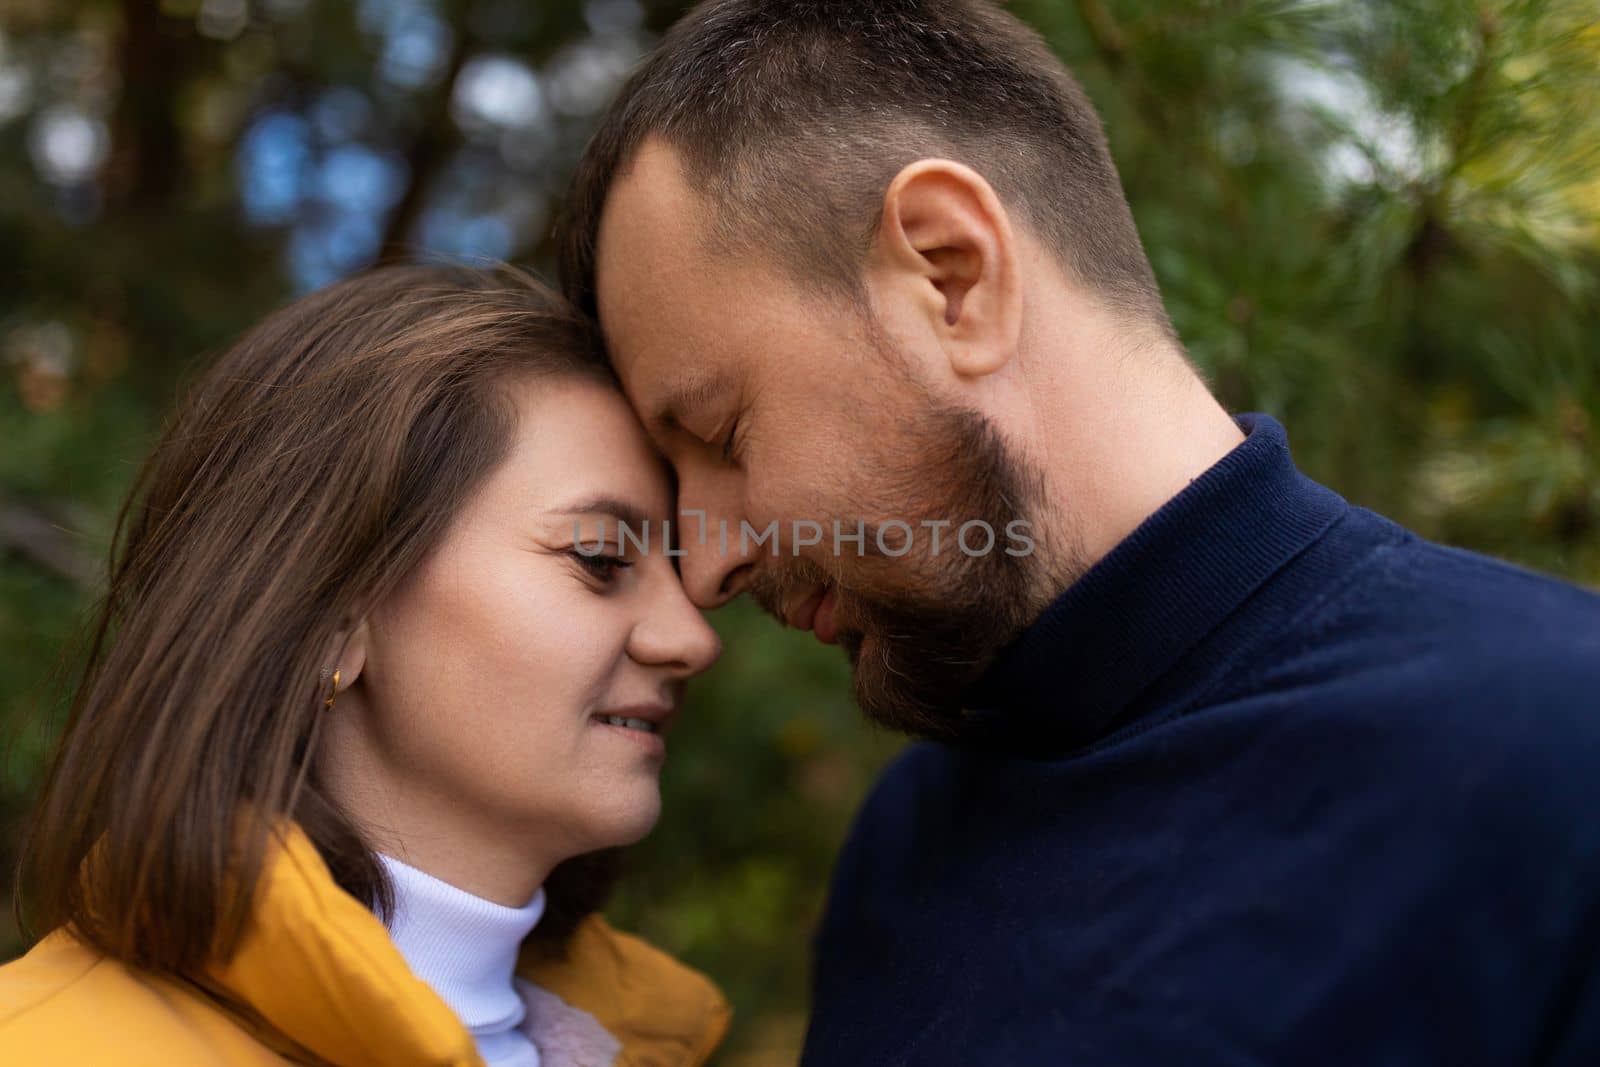 close-up portrait of middle-aged man and woman in love.